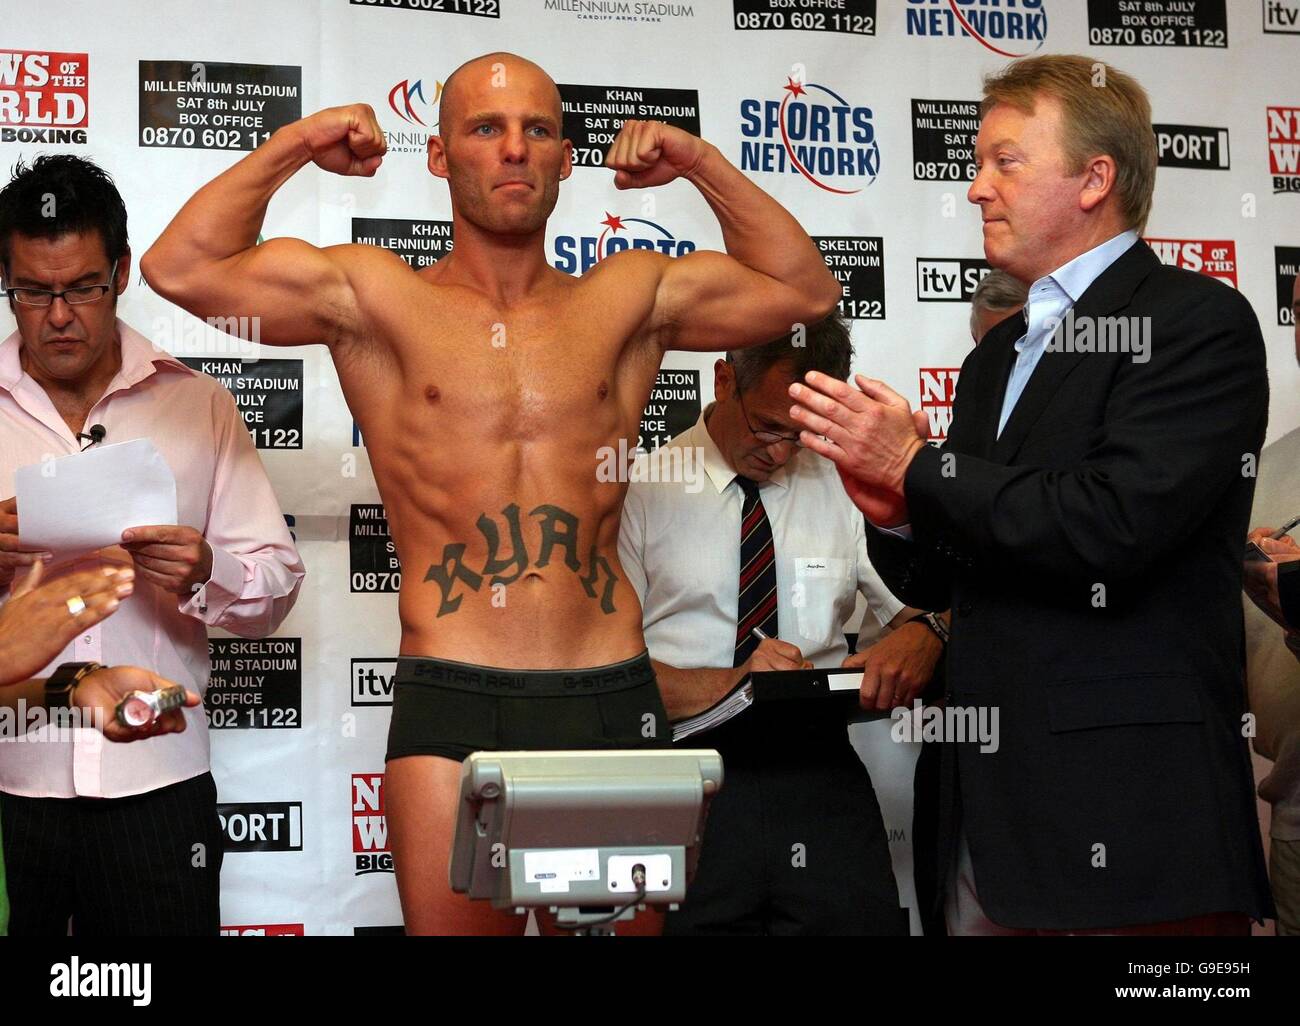 Ryan Rhodes during a weigh-in at the Millennium Stadium, Cardiff ahead of the boxing event on Saturday evening. Stock Photo